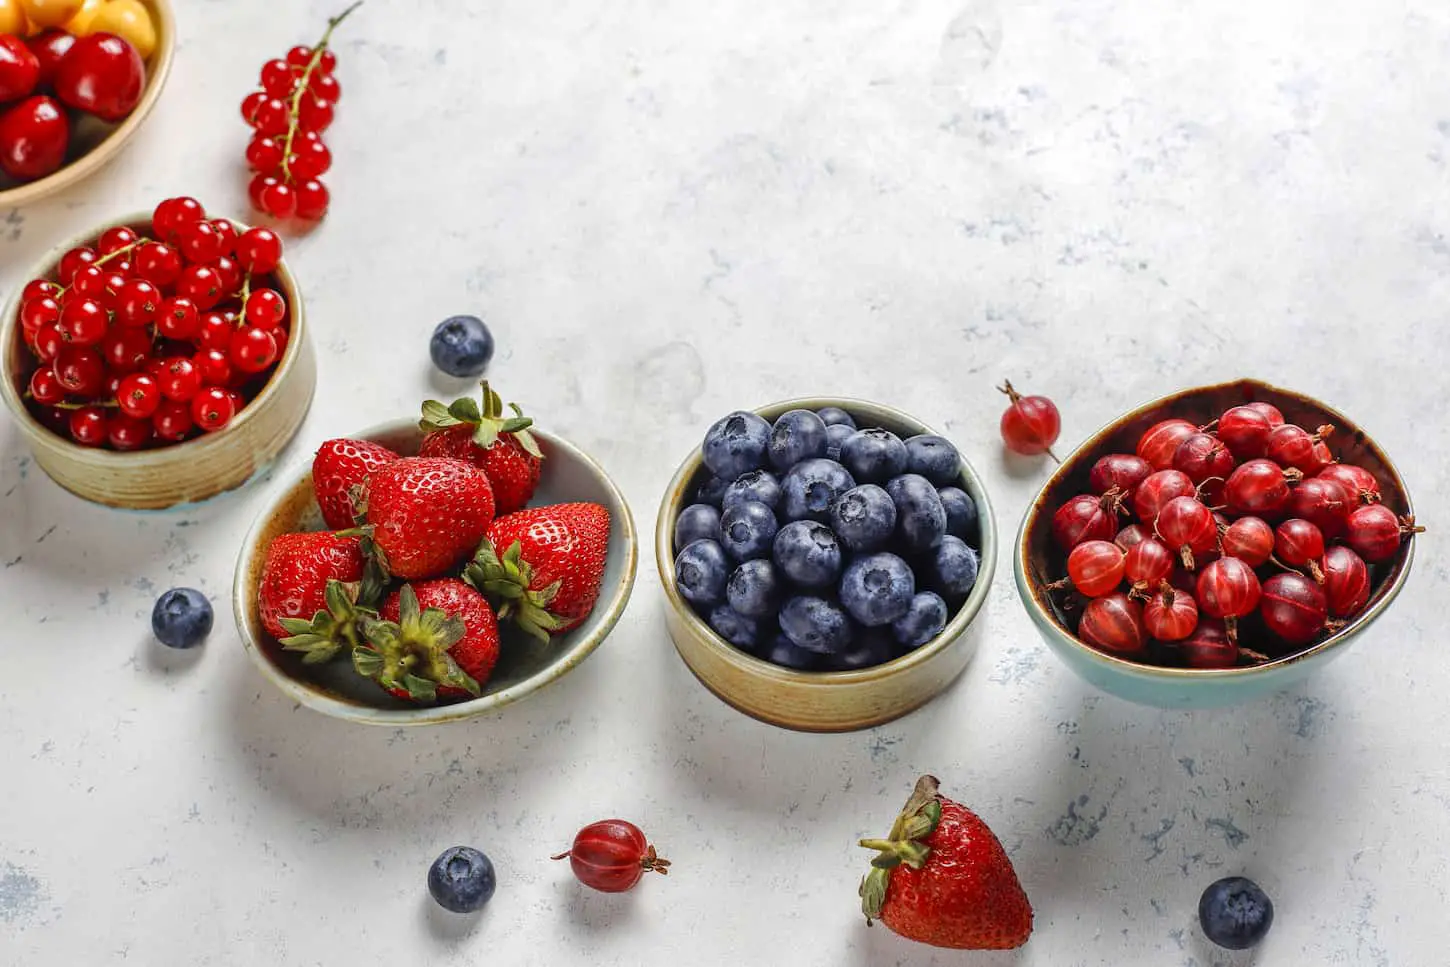 When Should You Store Berries In the Fridge?